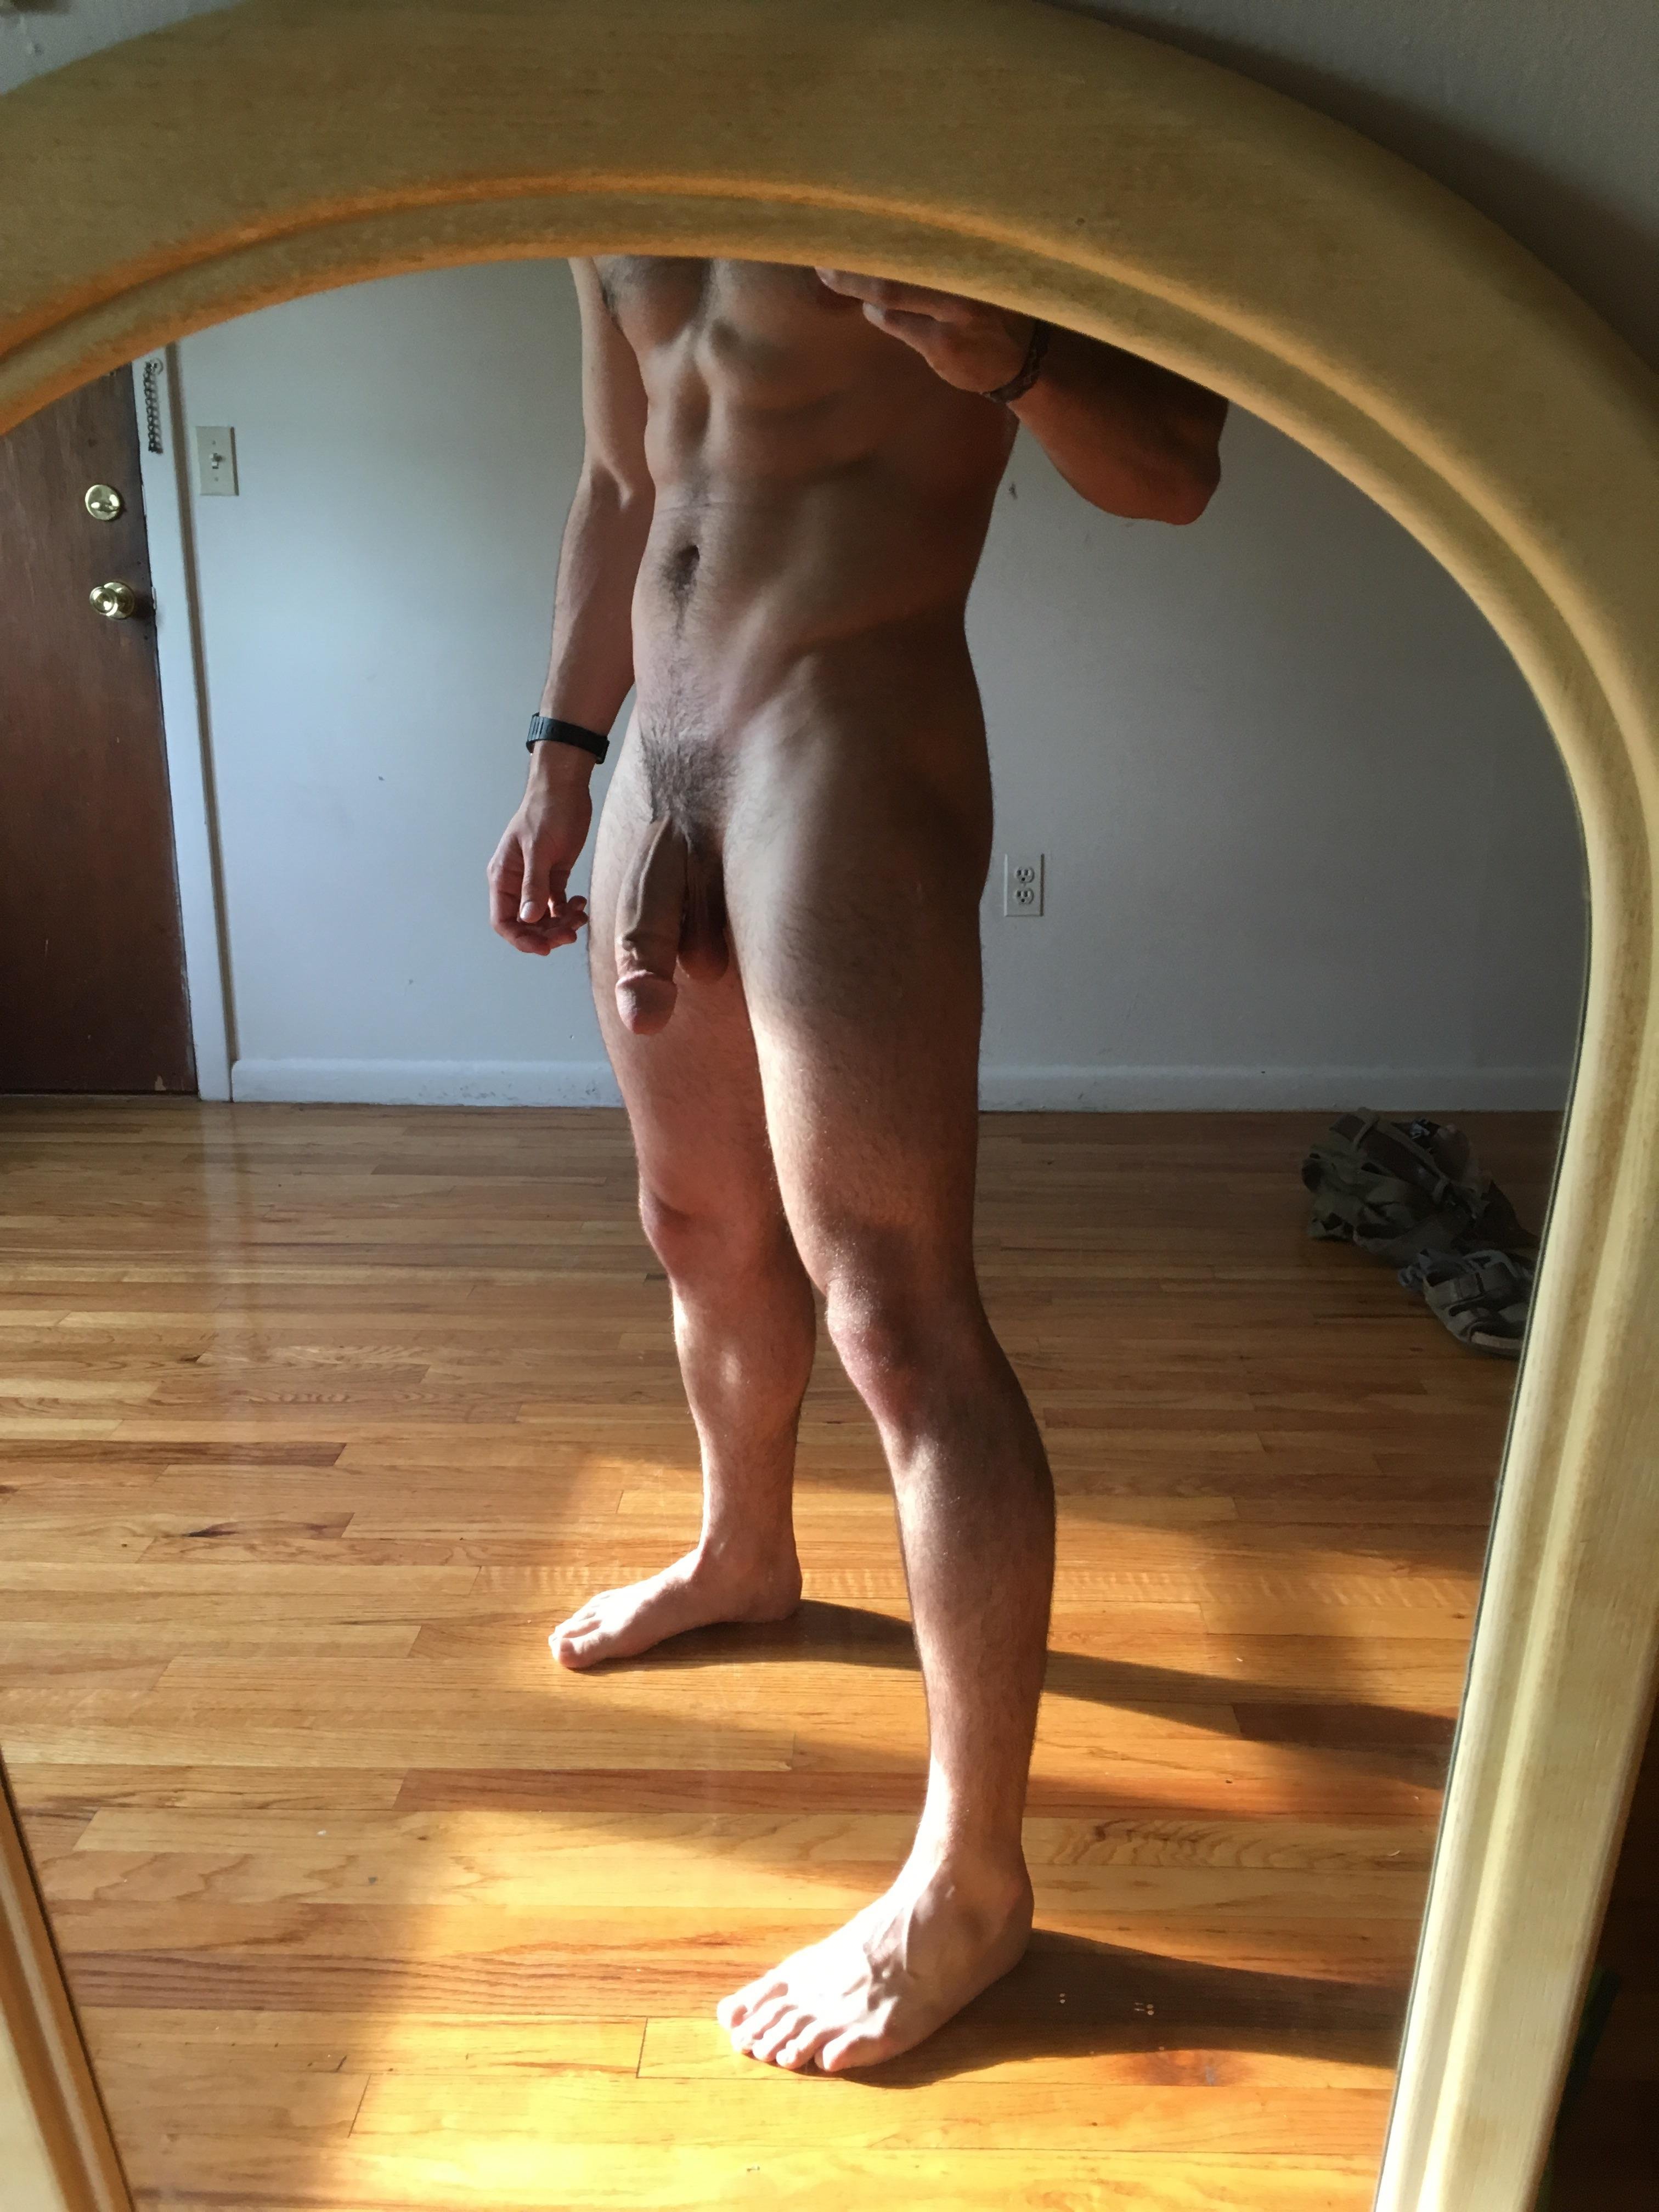 Roommate moved out. I plan on being naked all the time now